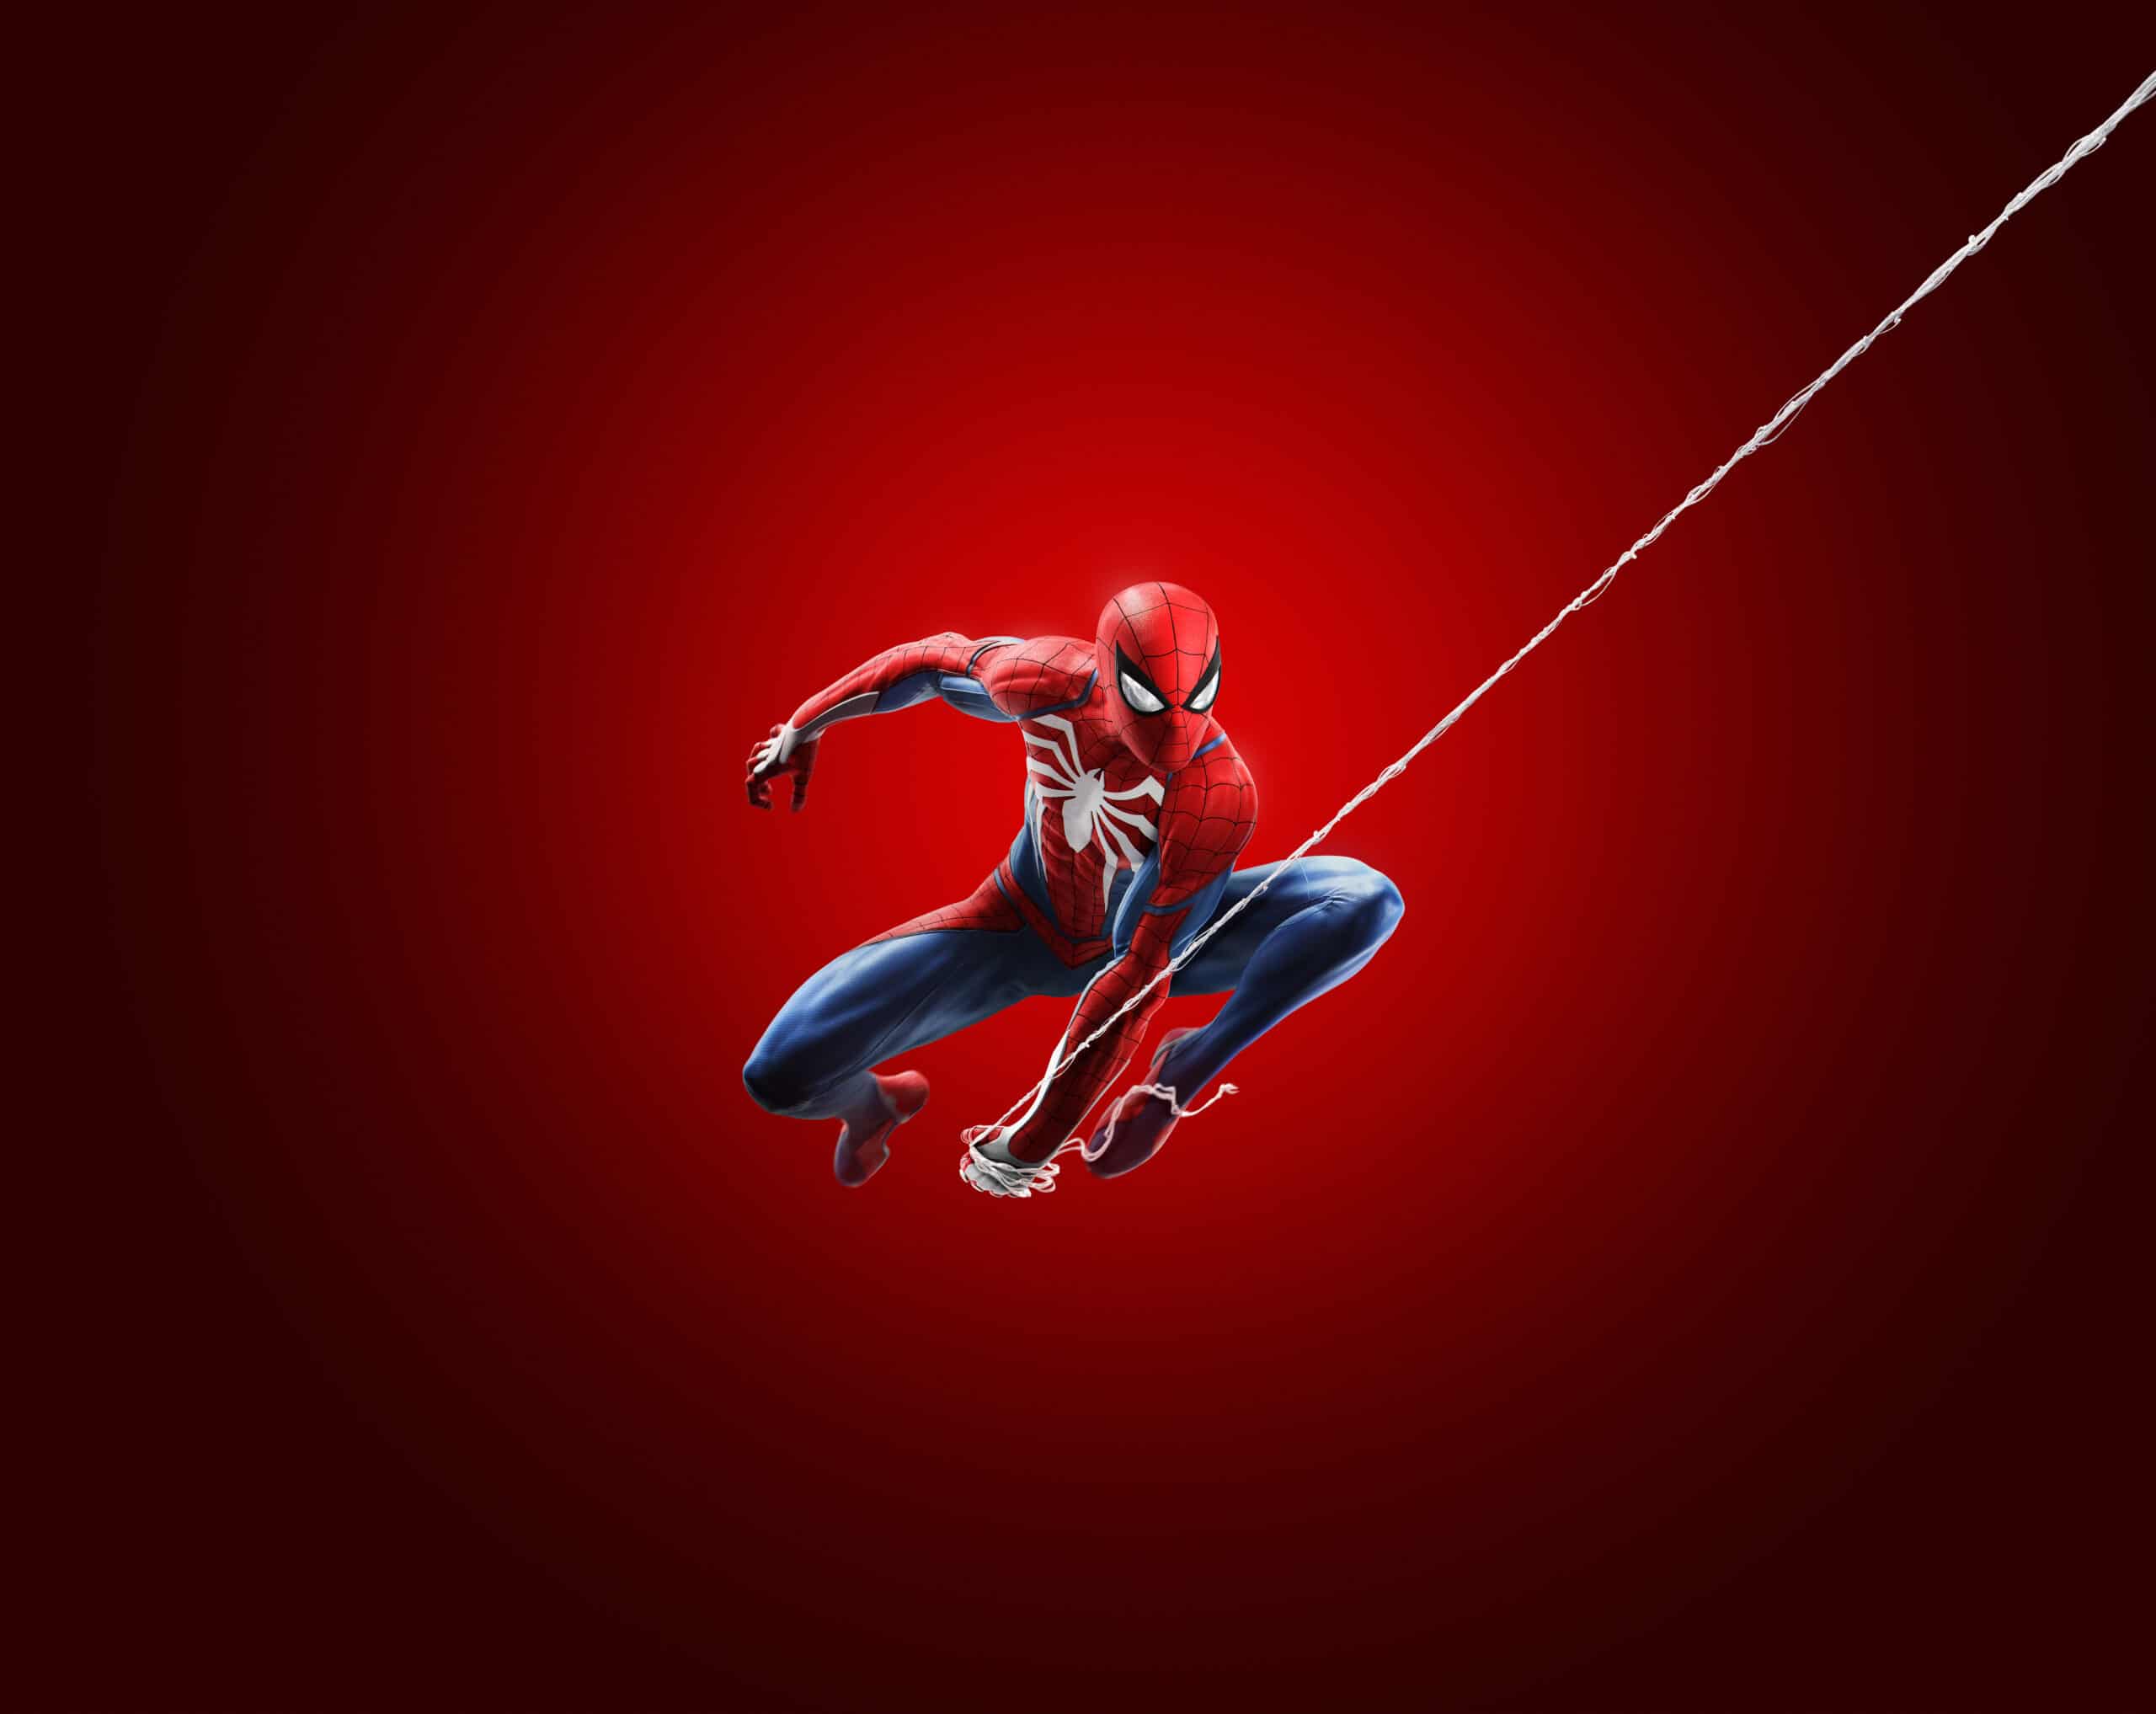 Amazing Spider-Man 2 launching April 17 for Android, iOS and Windows Phone